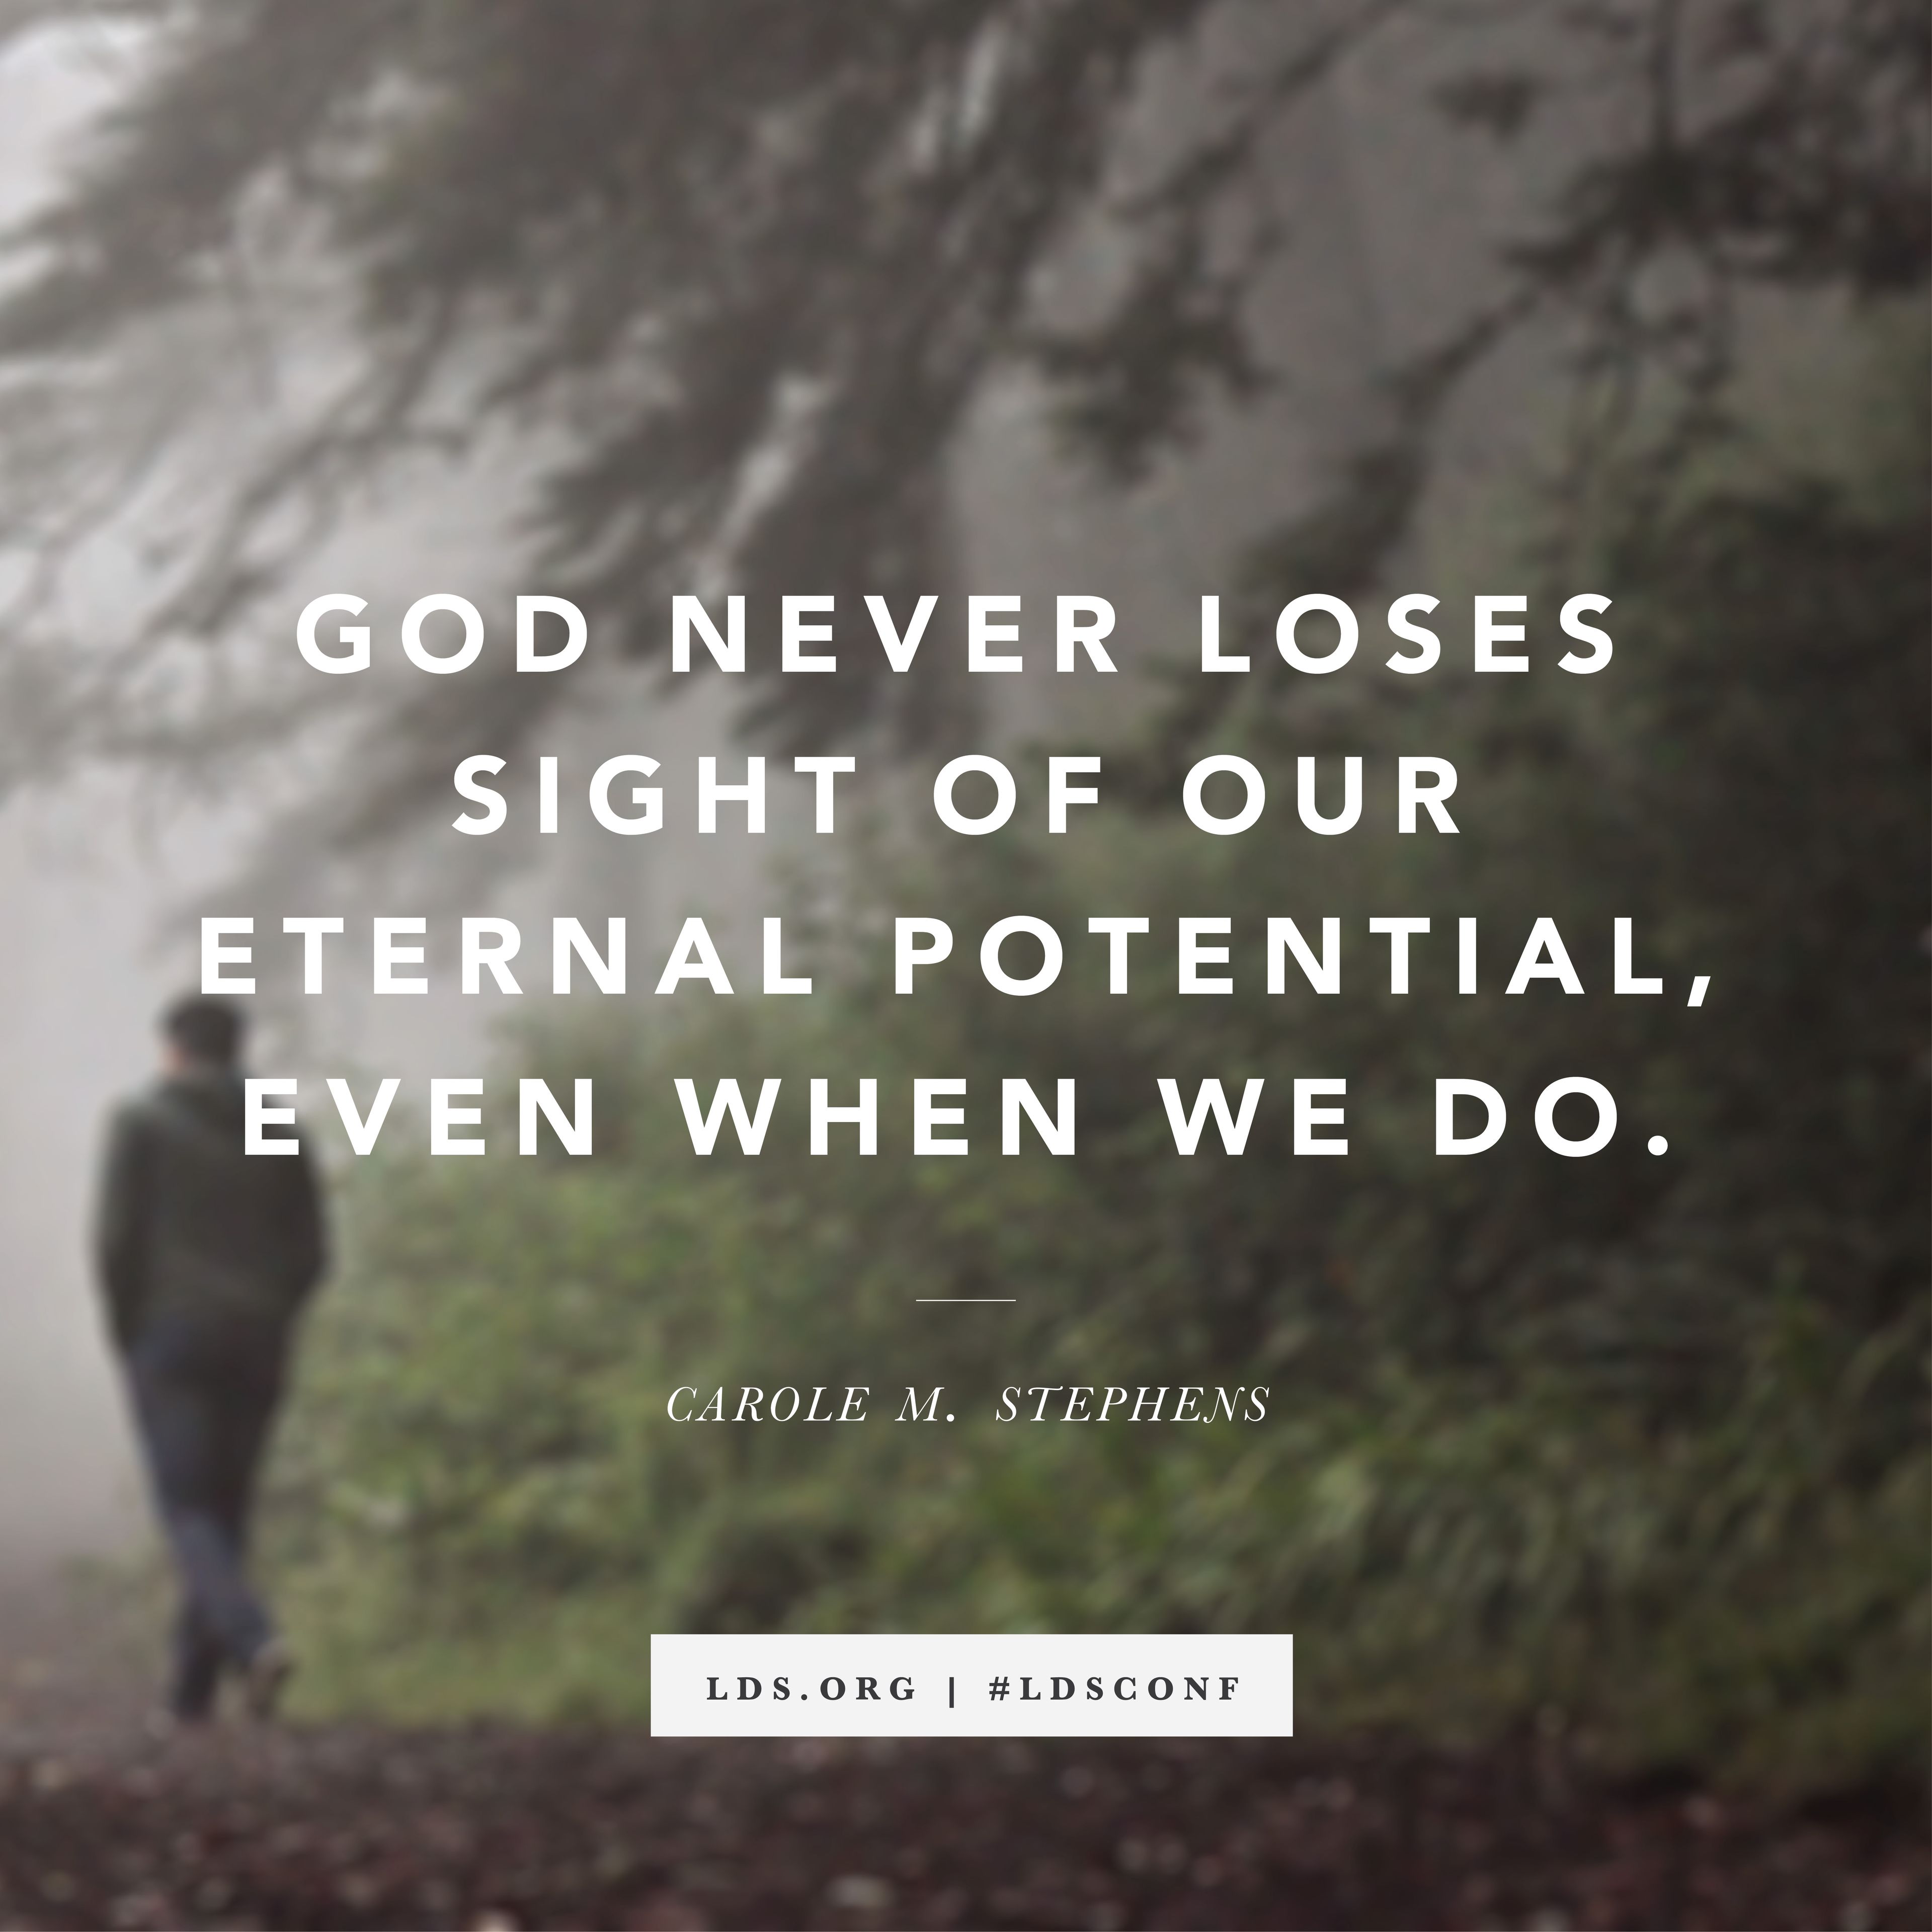 “God never loses sight of our eternal potential, even when we do.” —Carole M. Stephens, “If Ye Love Me, Keep My Commandments” © See Individual Images ipCode 1.